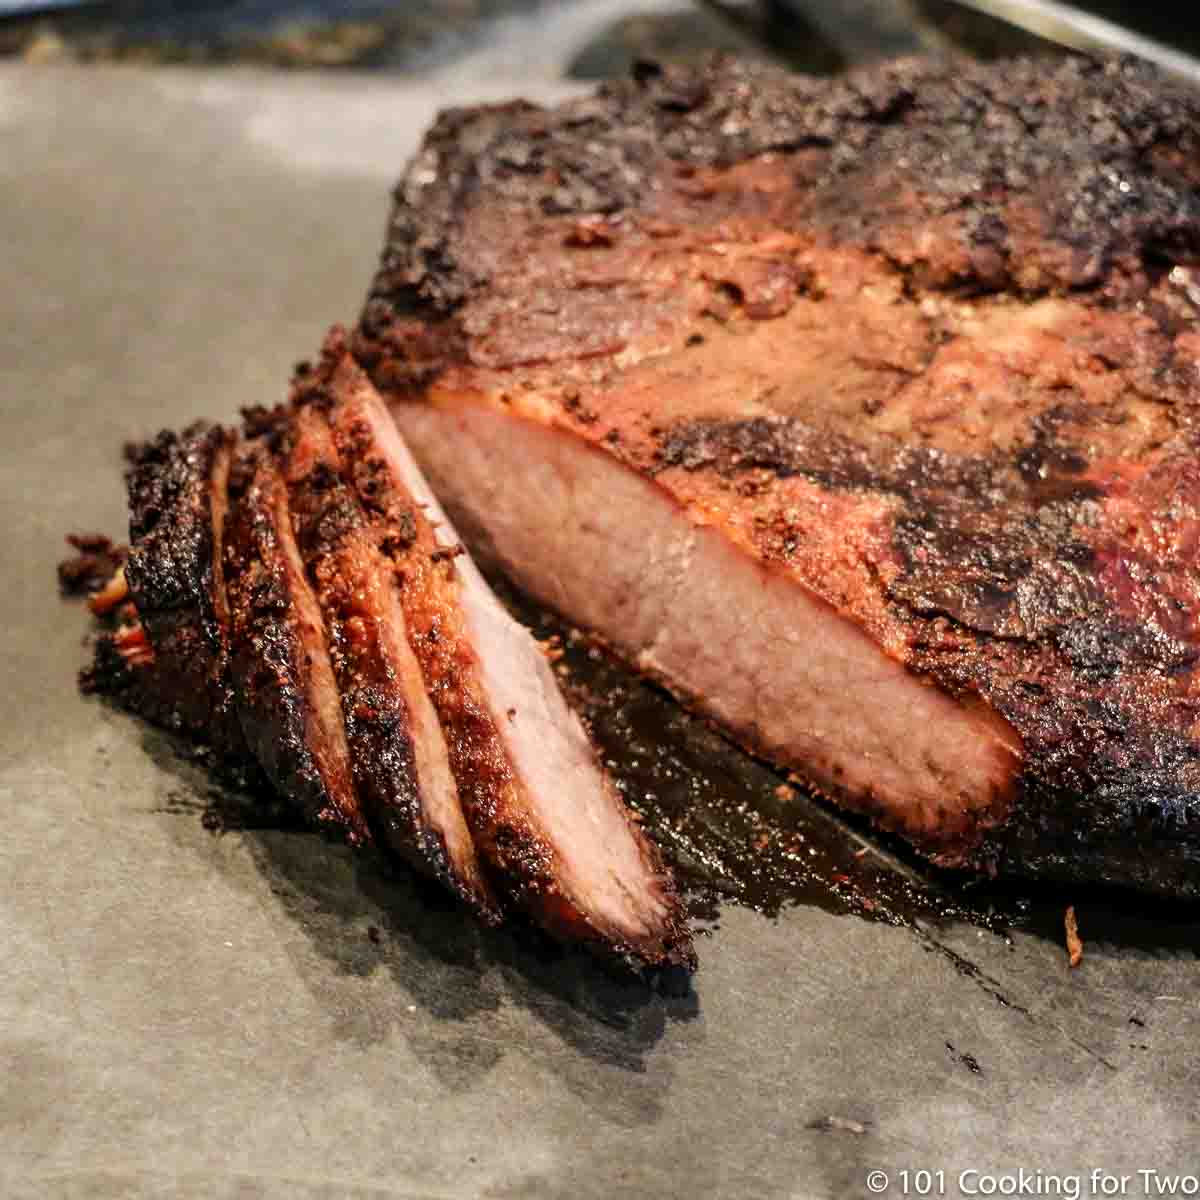 Cooked brisket on a gray board.